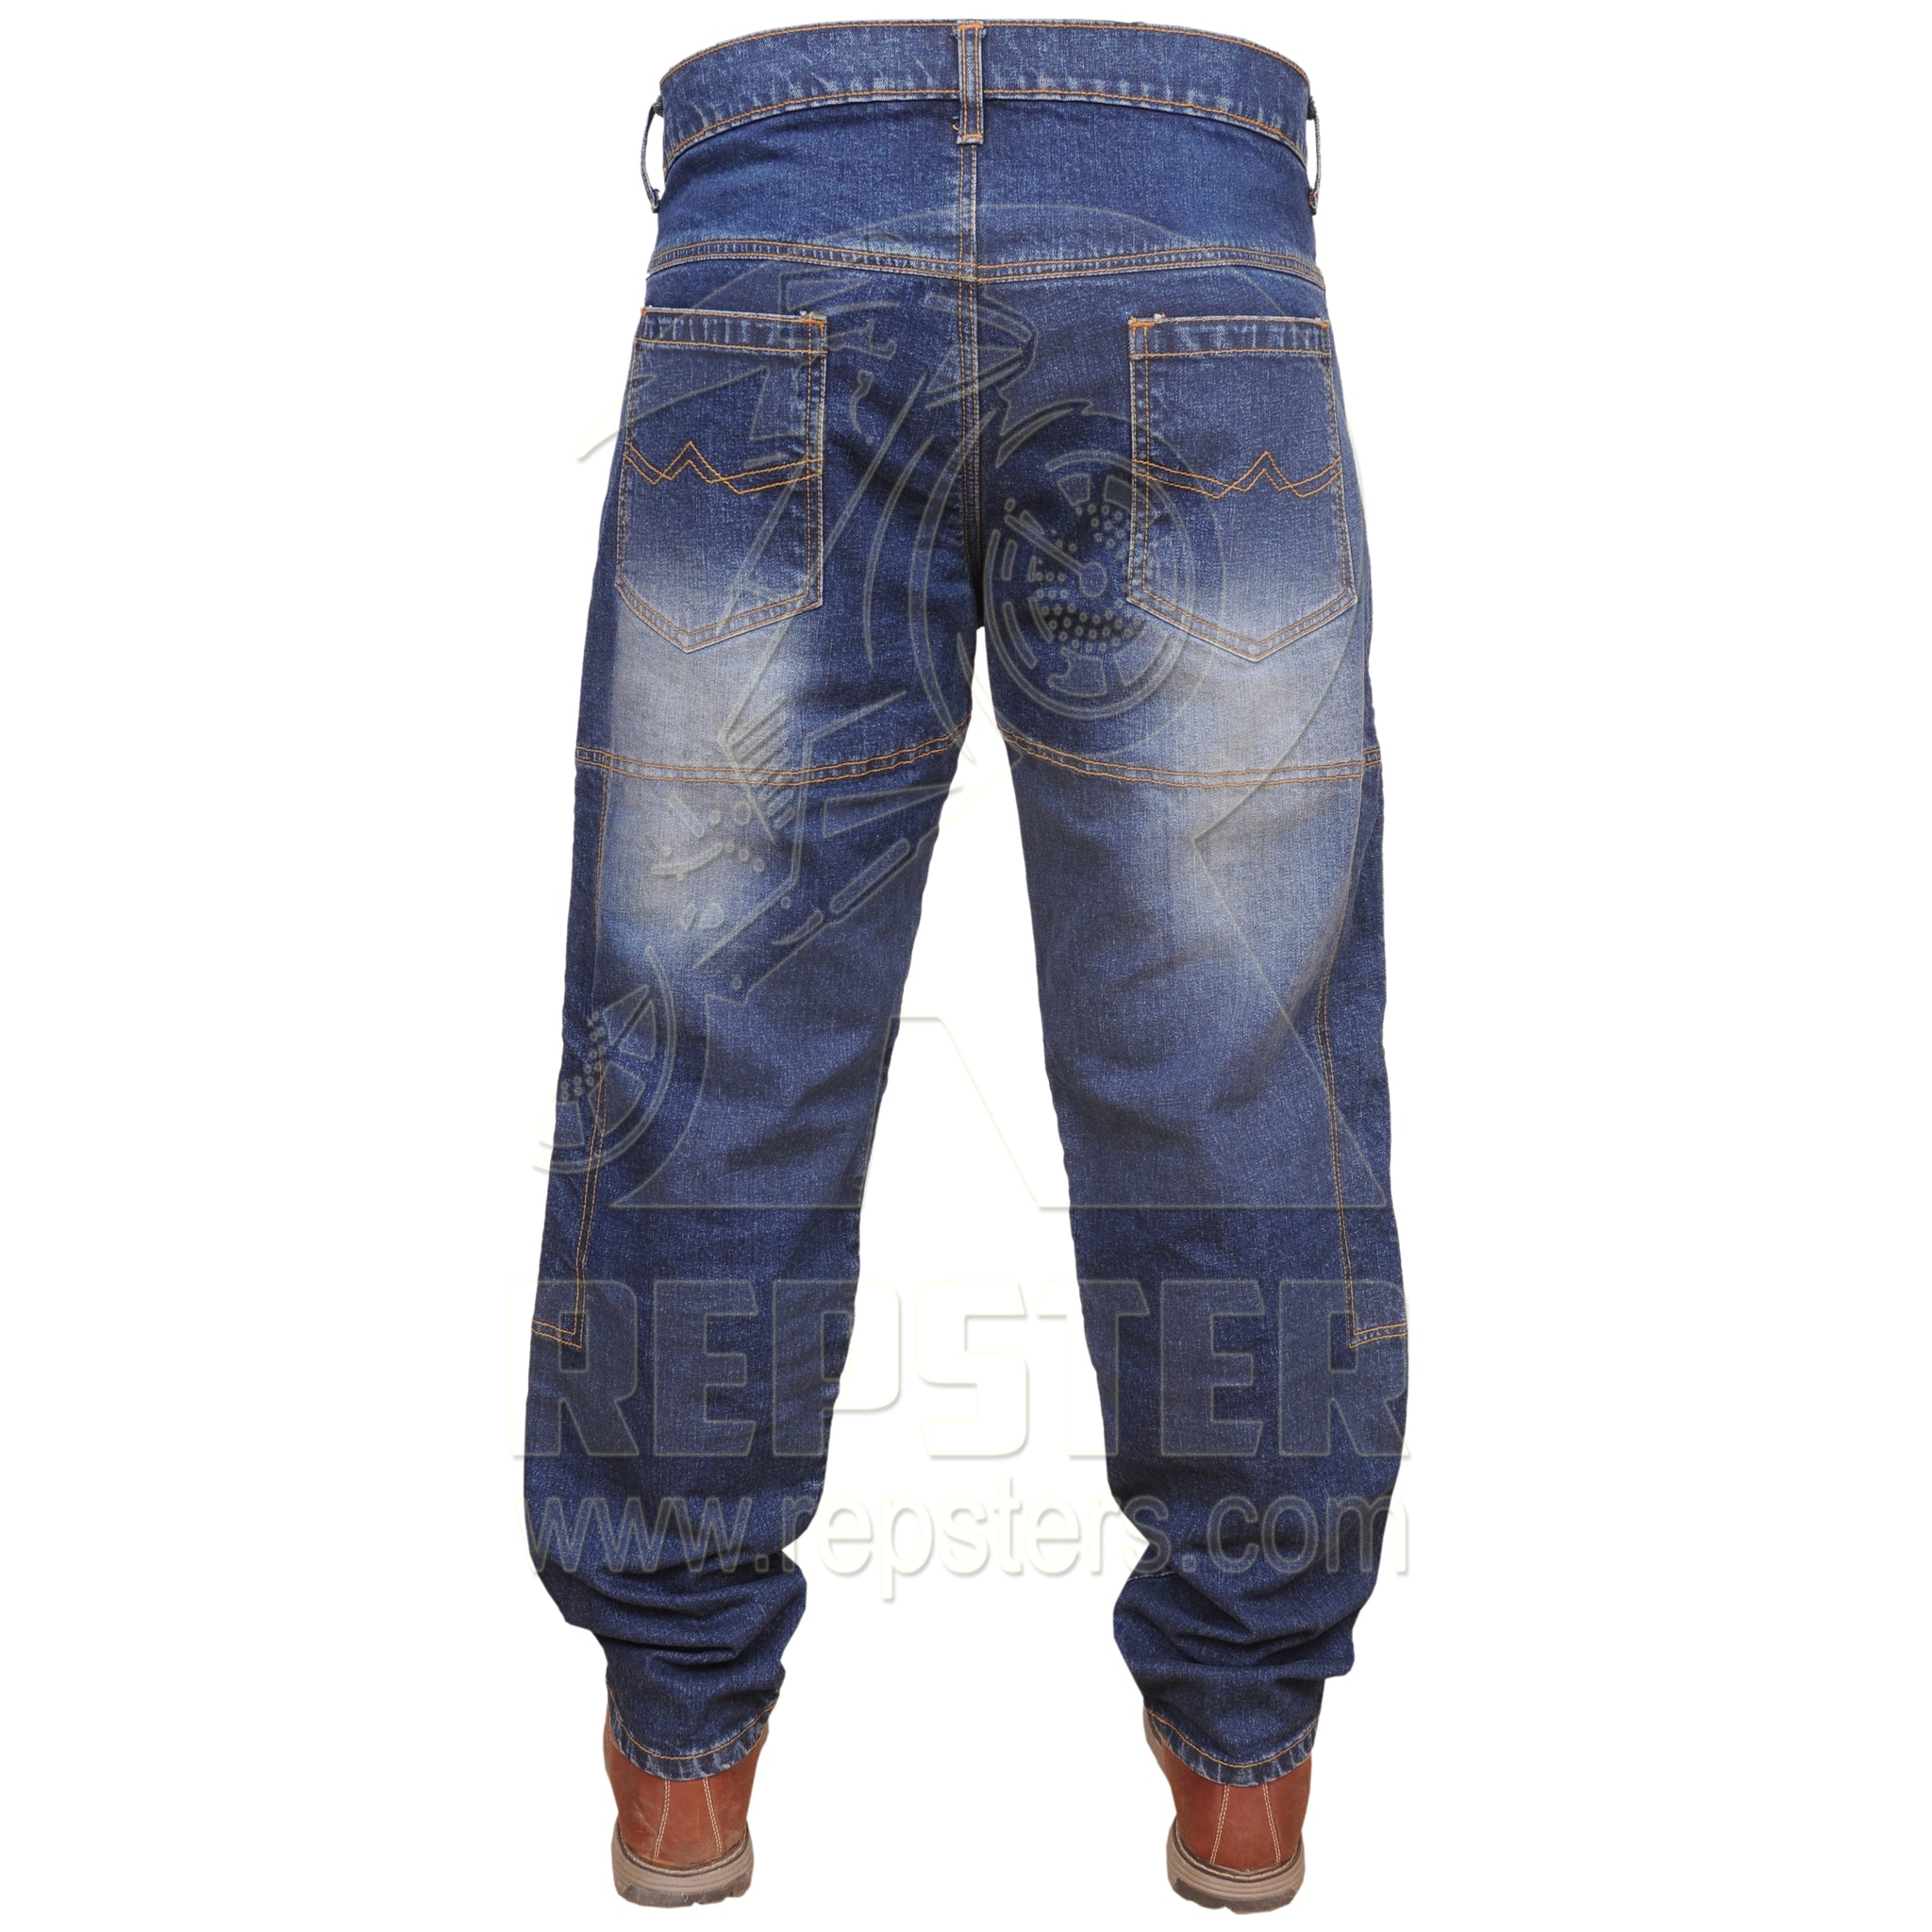 Motorcycle Riding Jeans R02 - Repsters - Repsters